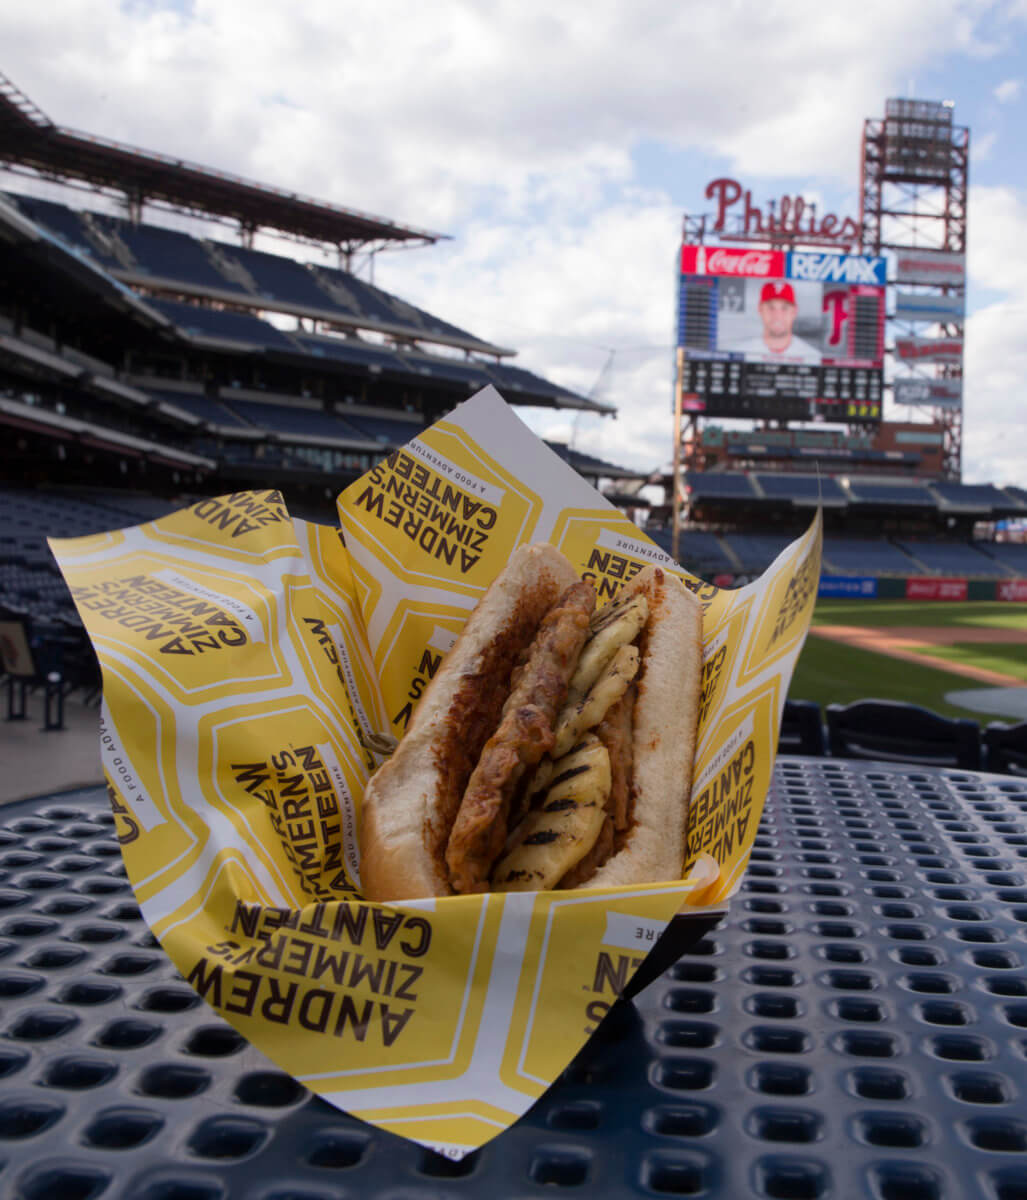 5 reasons to go to Citizens Bank Park this year — even if the Phillies